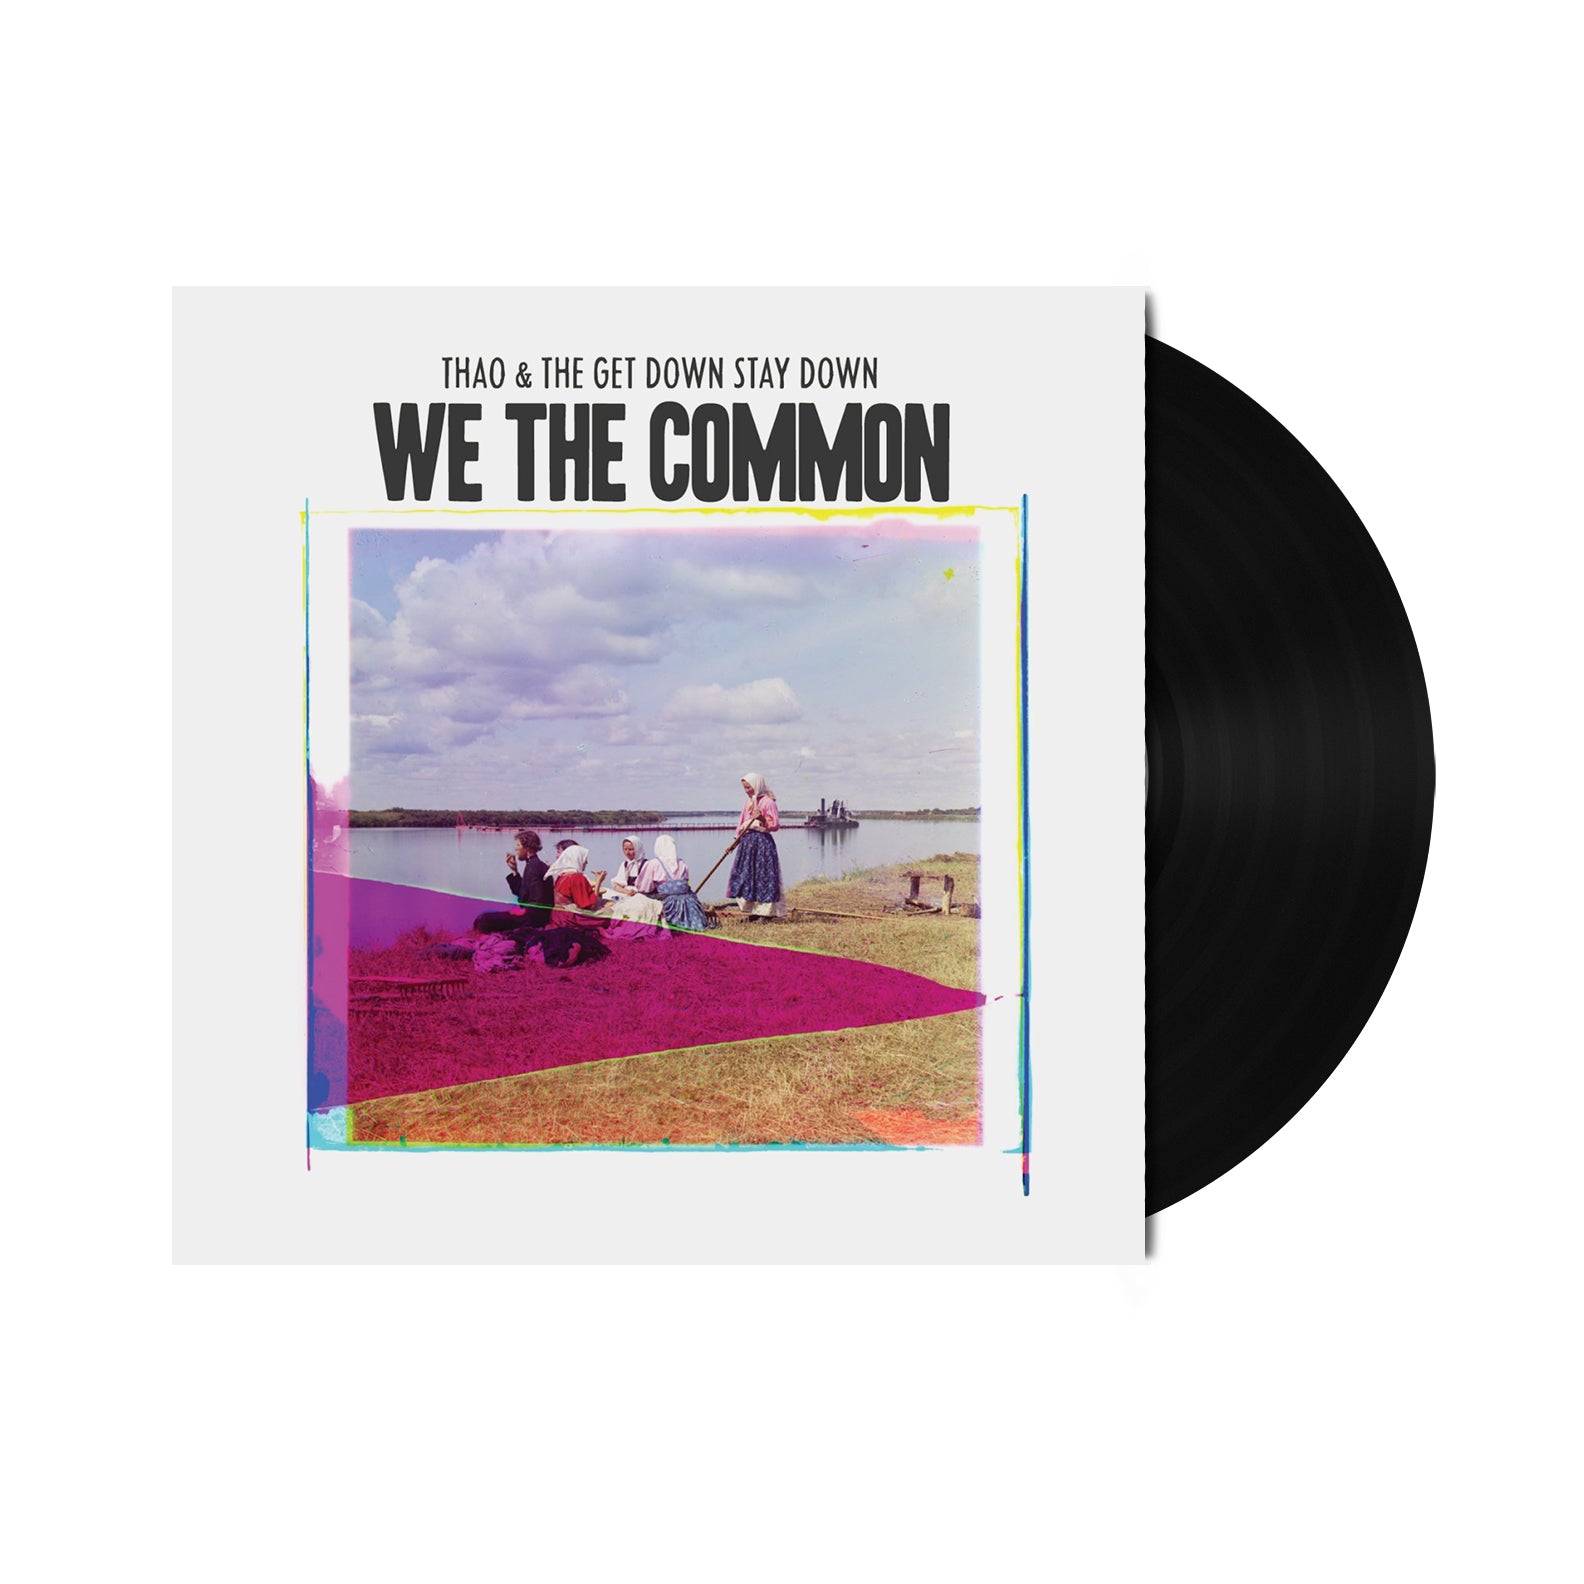 Thao & The Get Down Stay Down "We The Common" LP/CD